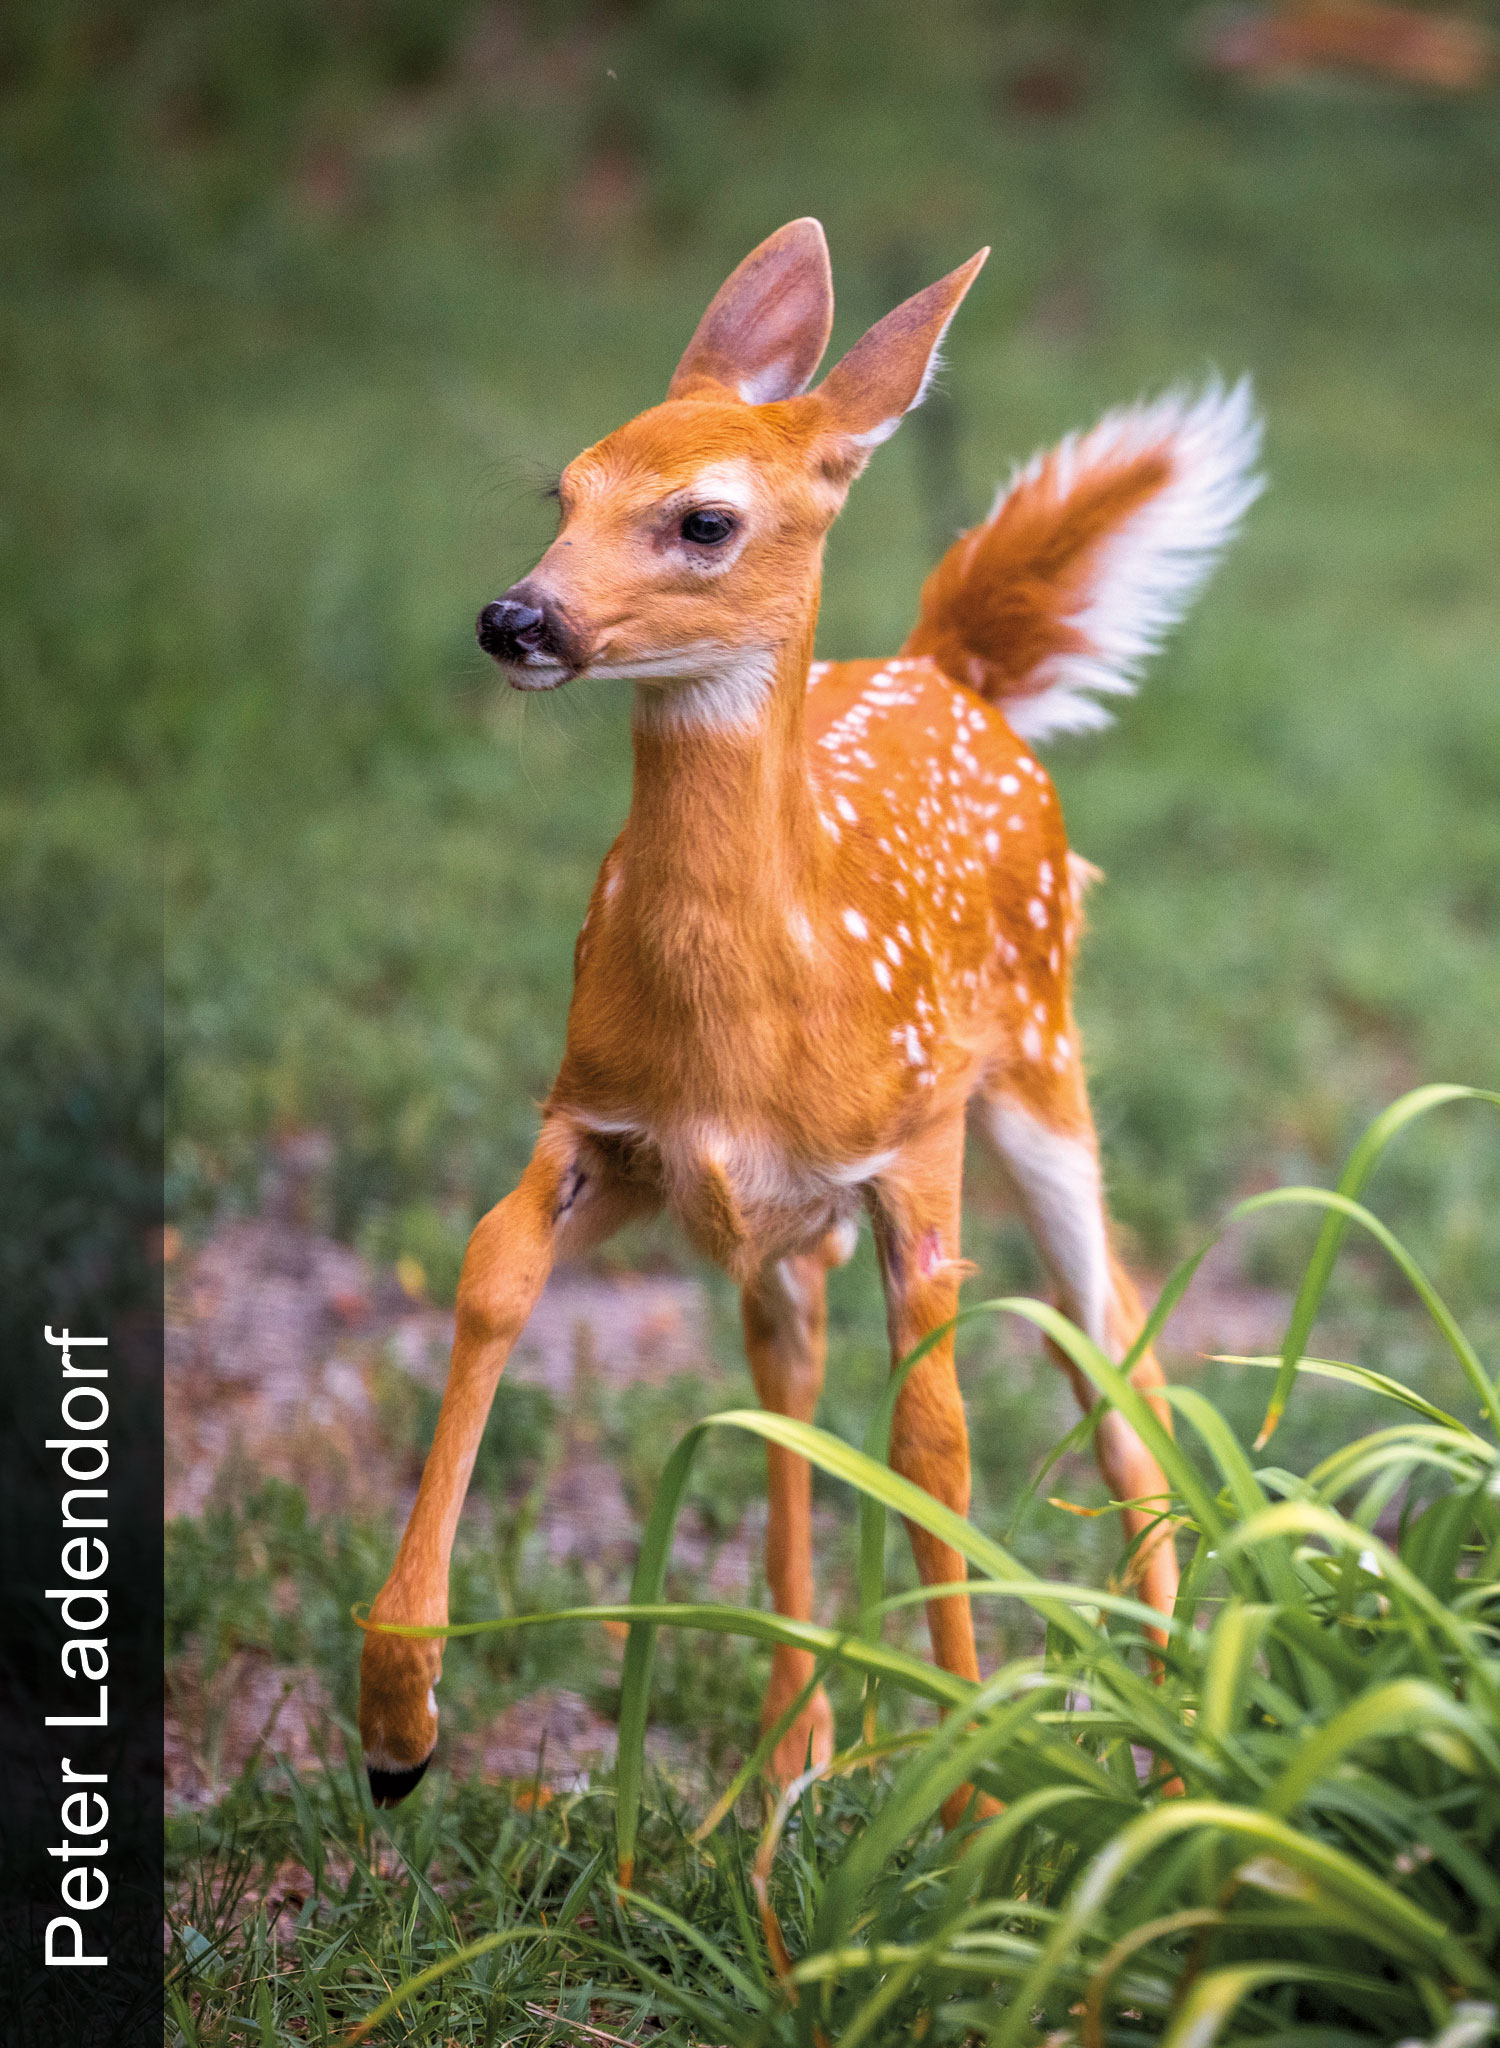 Whtietail fawn